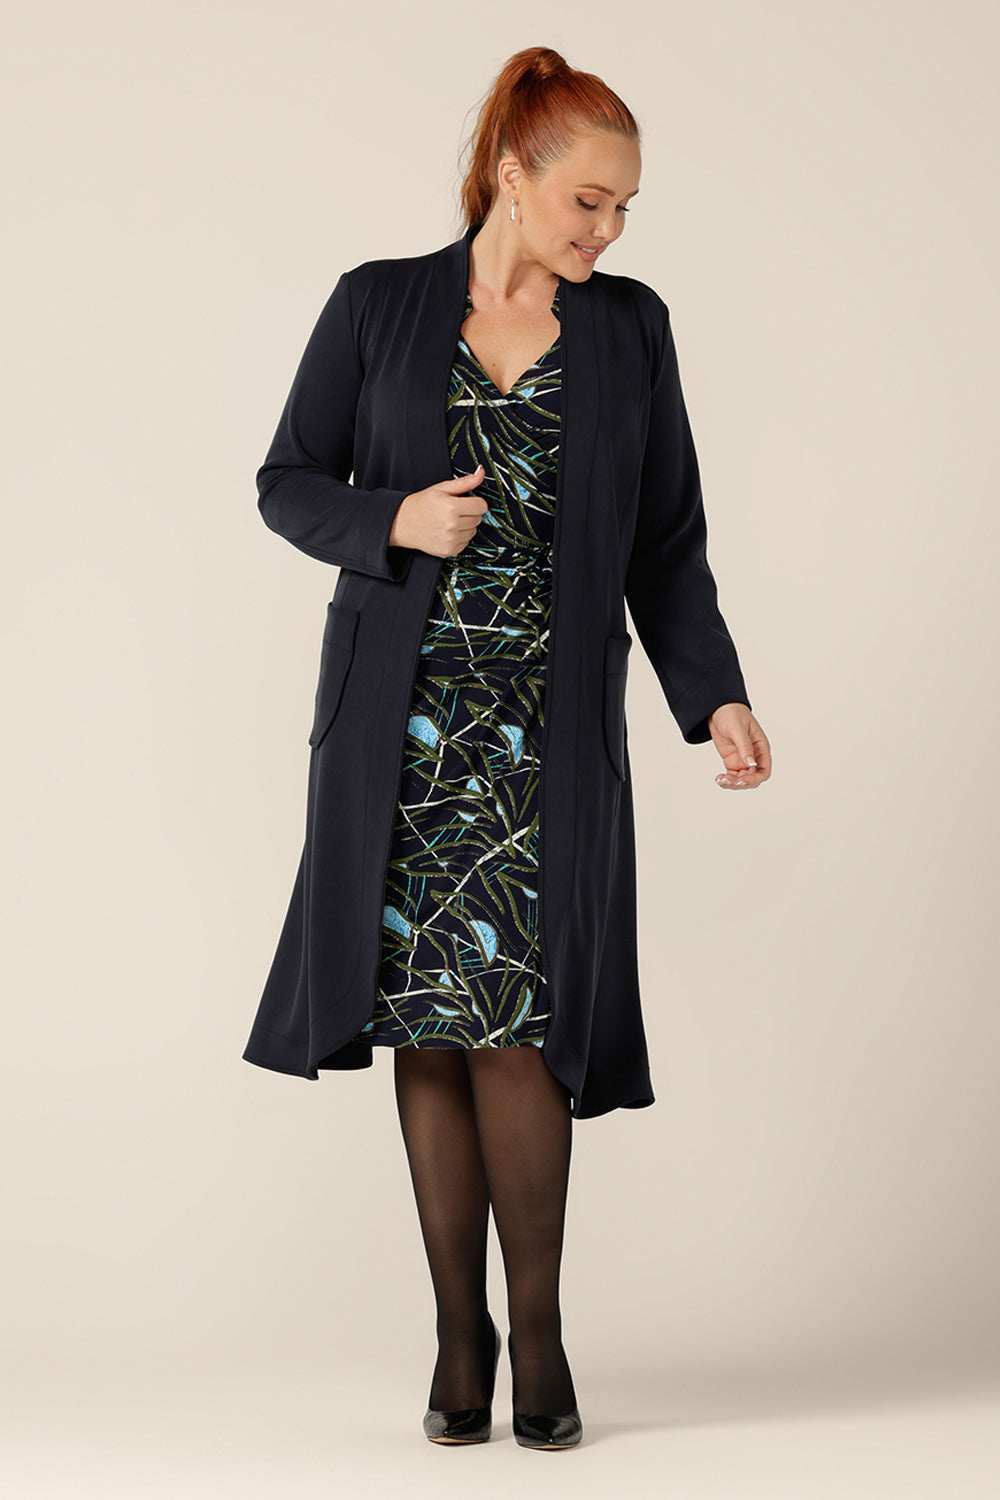 A size 12 woman wears the Marant Trenchcoat in Bluestone by Australian and New Zealand size inclusive clothing label, L&F. A collarless, open fronted coat with tie belt and patch pockets, this navy coat is worn with a jersey wrap dress, both of which are made in Australia.